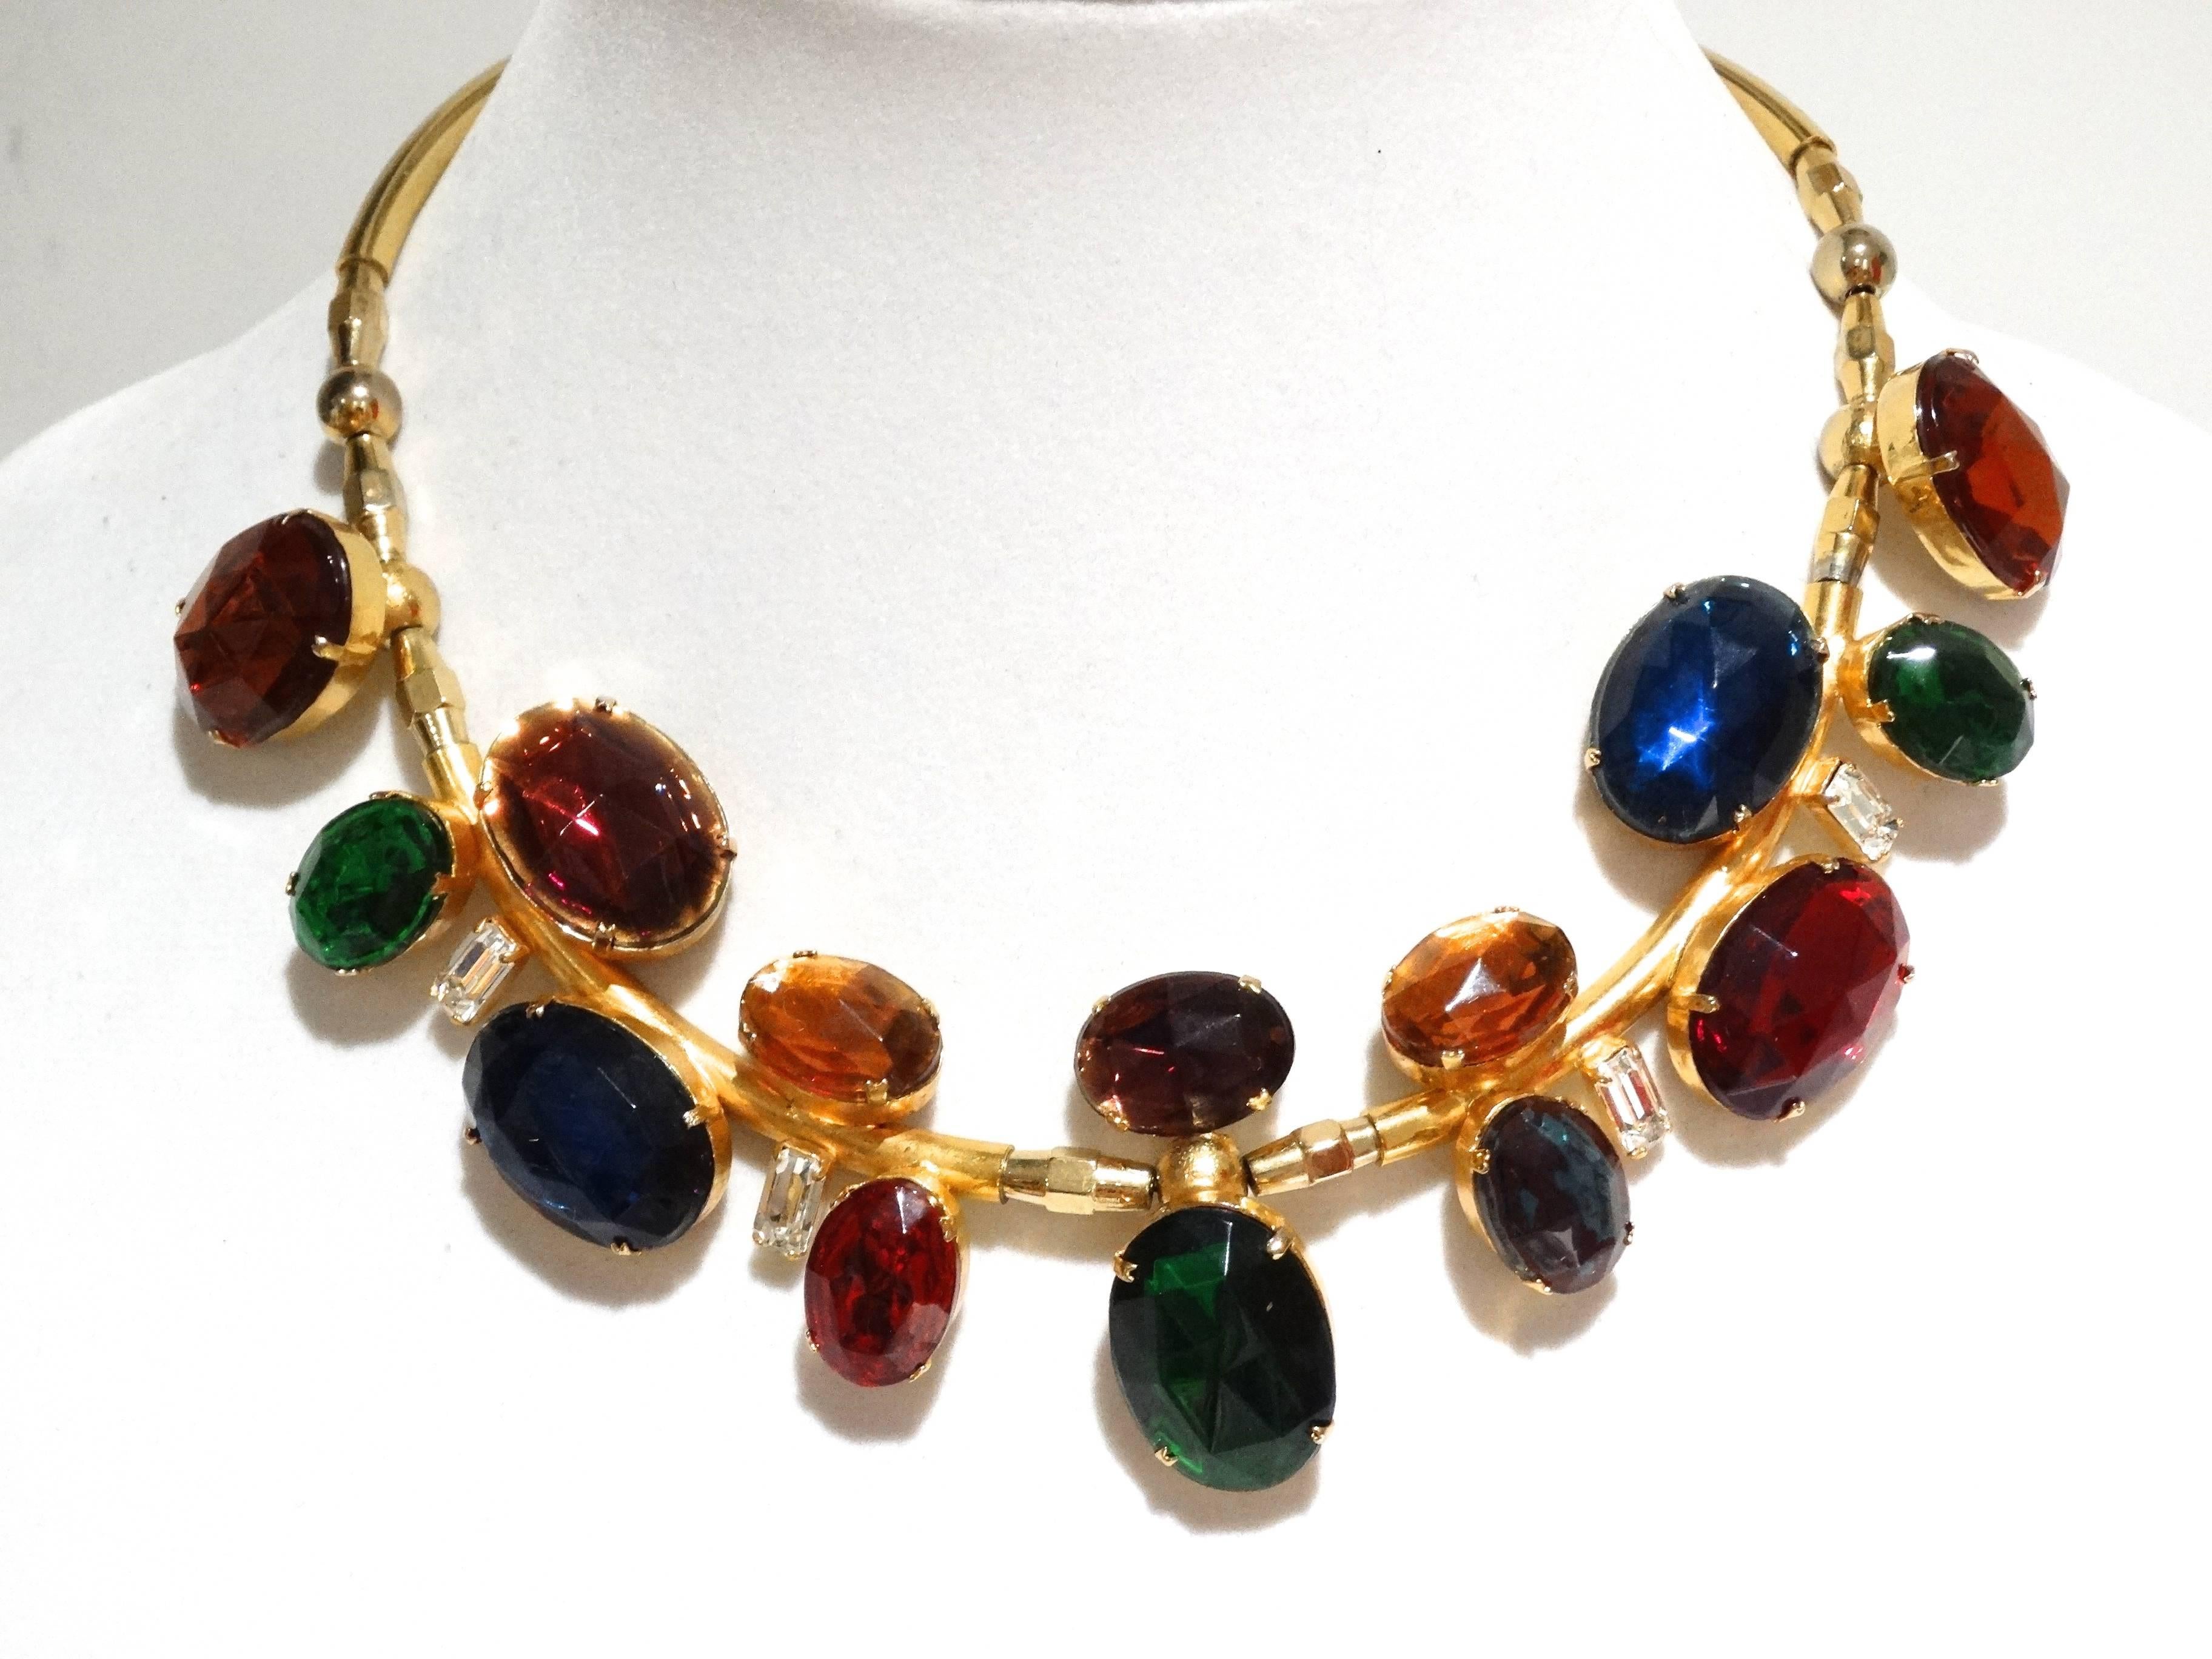 Emilio Pucci Gem Collar Necklace, 1980s  In Good Condition For Sale In Scottsdale, AZ